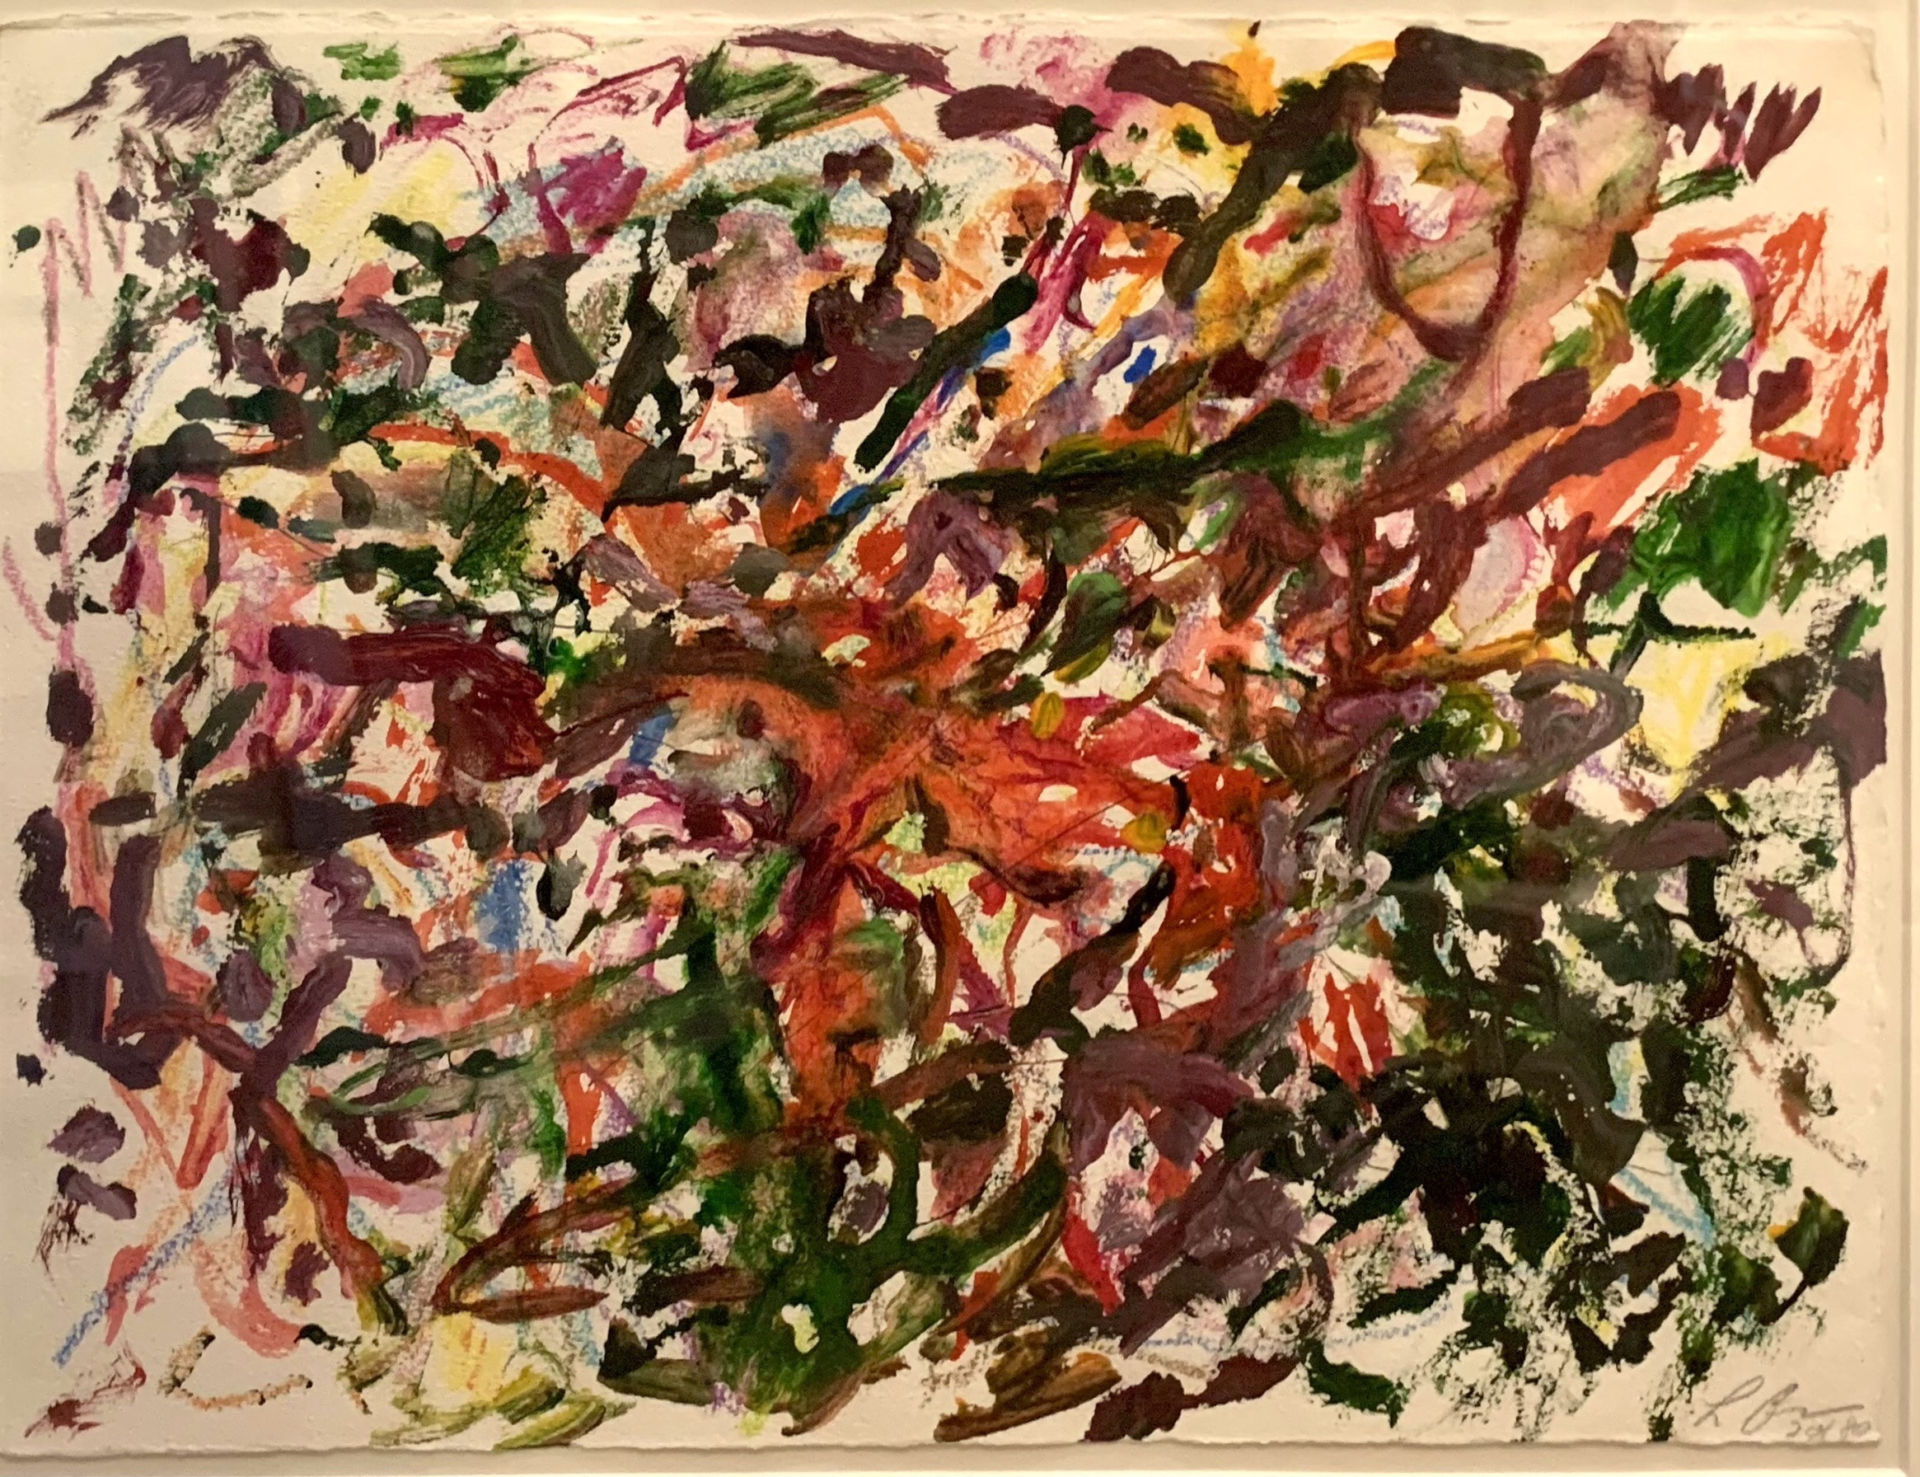 Larry Poons, an AHRMA racer and world-renowned artist, is donating this piece of his original artwork to AHRMA, which is auctioning the work off during the Barber Vintage Festival. Photo courtesy Larry Poons and AHRMA.